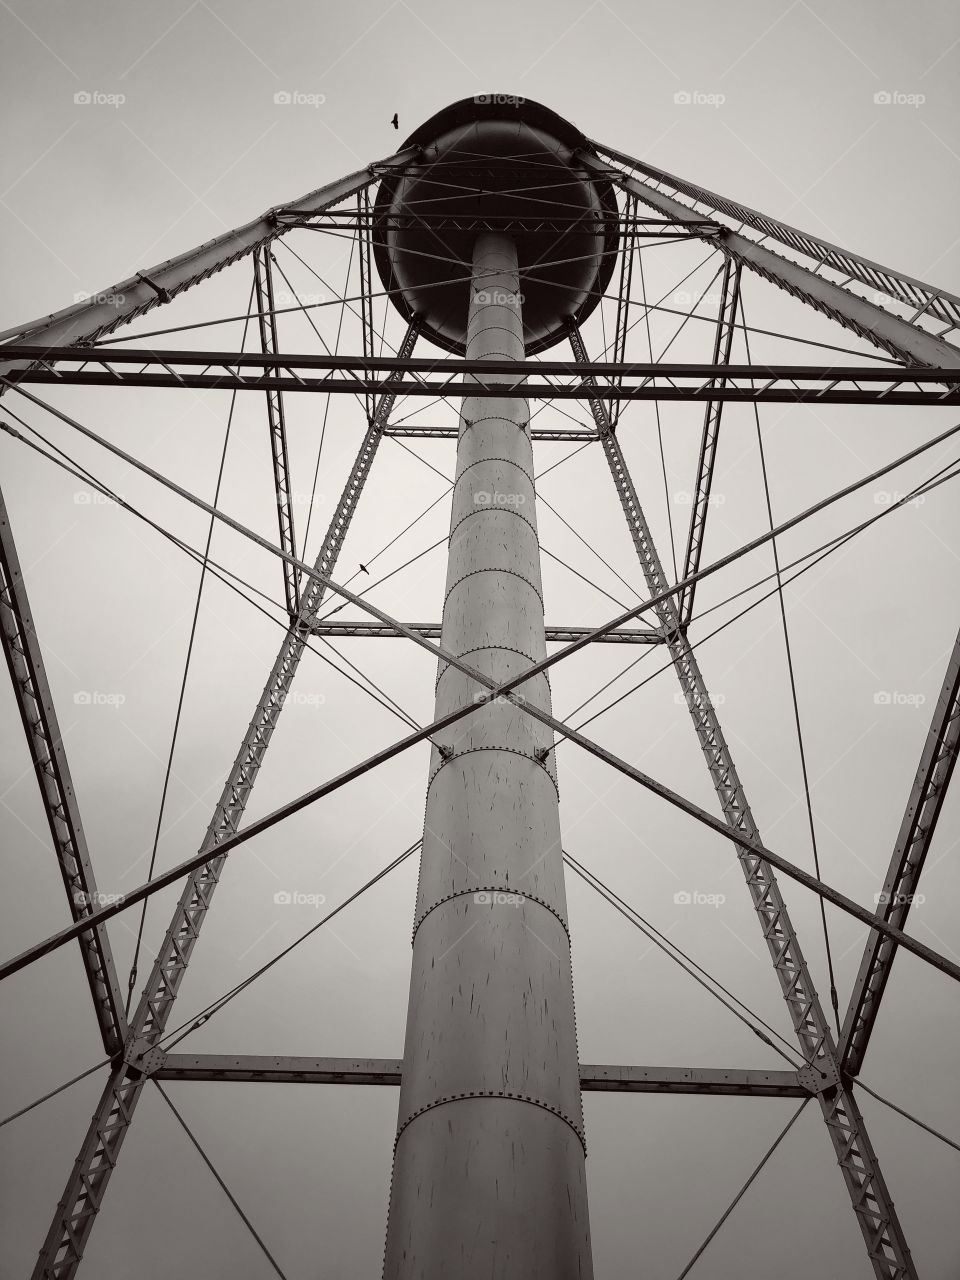 Vintage water tower under a gray Kansas sky